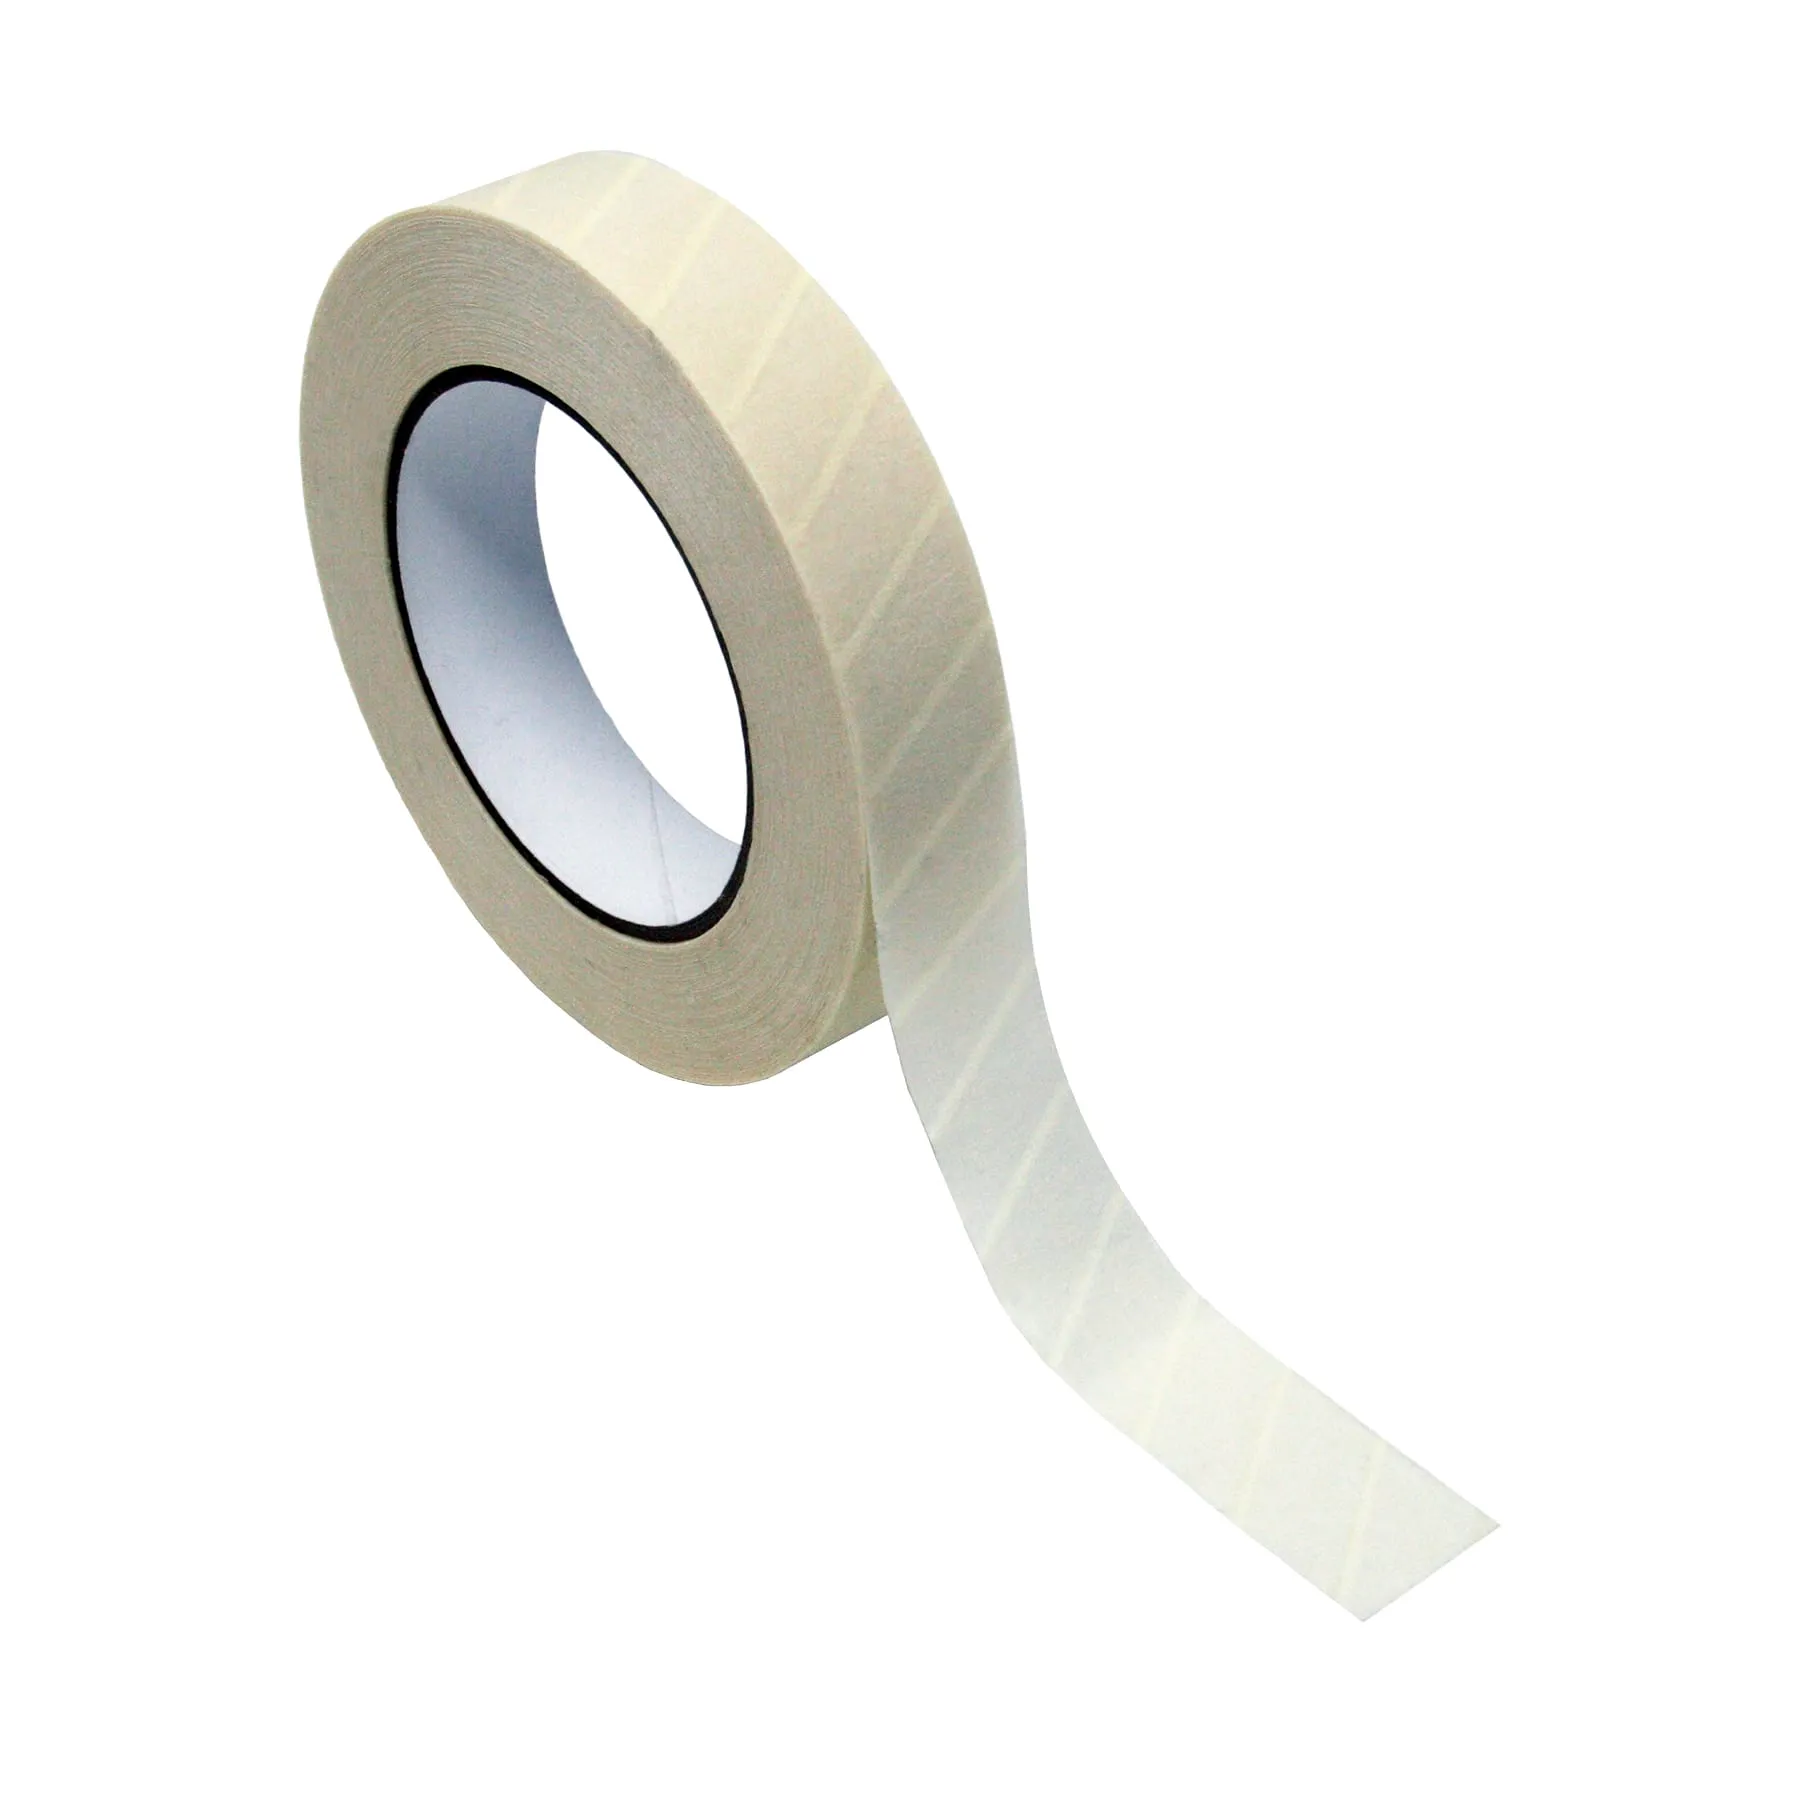 Propper - From: 26800400 To: 26814616 - Manufacturing Strate line Autoclave Indicator Tape Steam